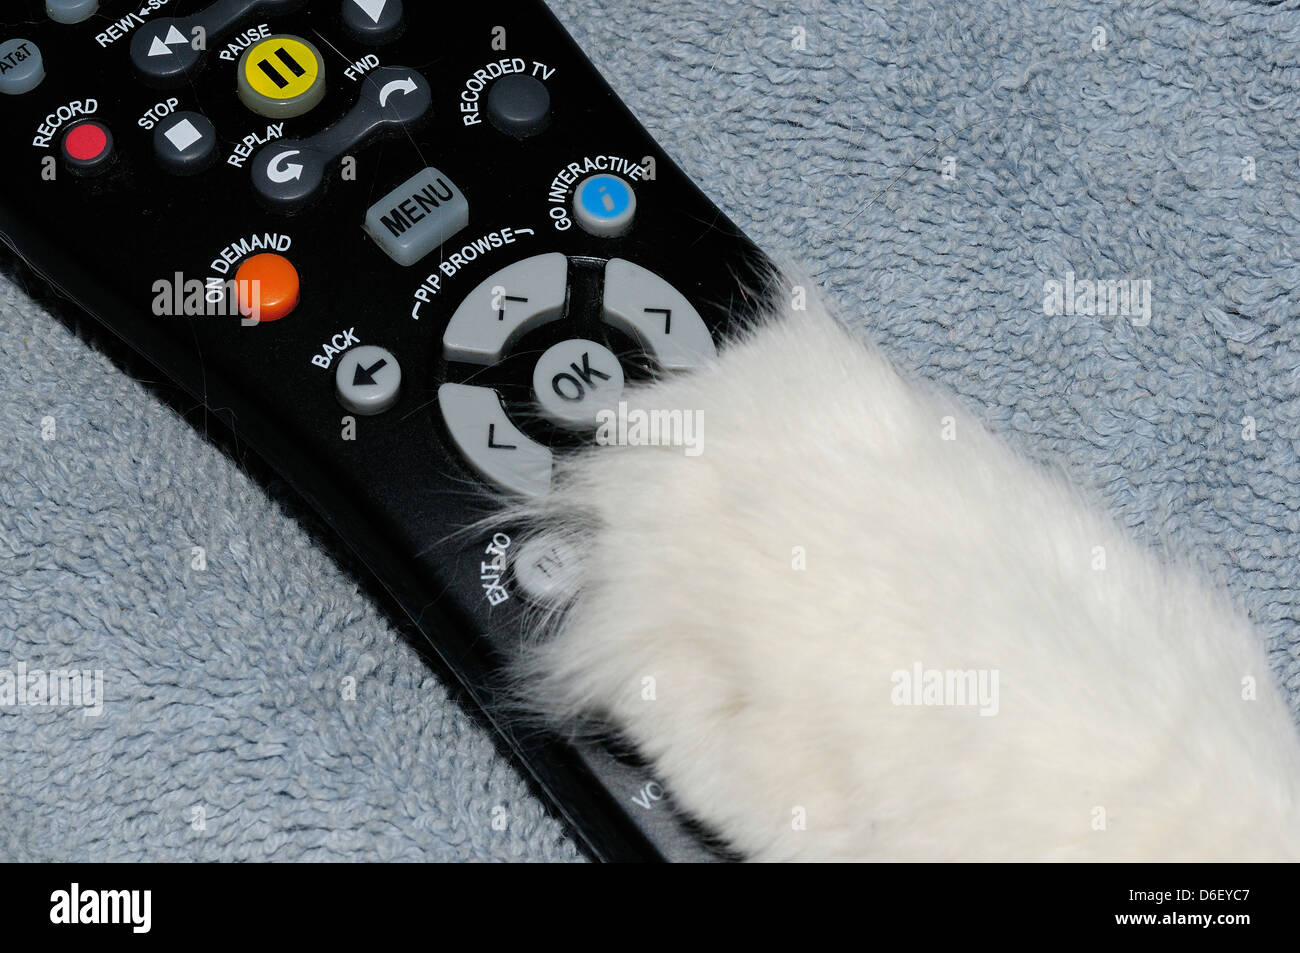 Cat paw on TV remote control. Stock Photo